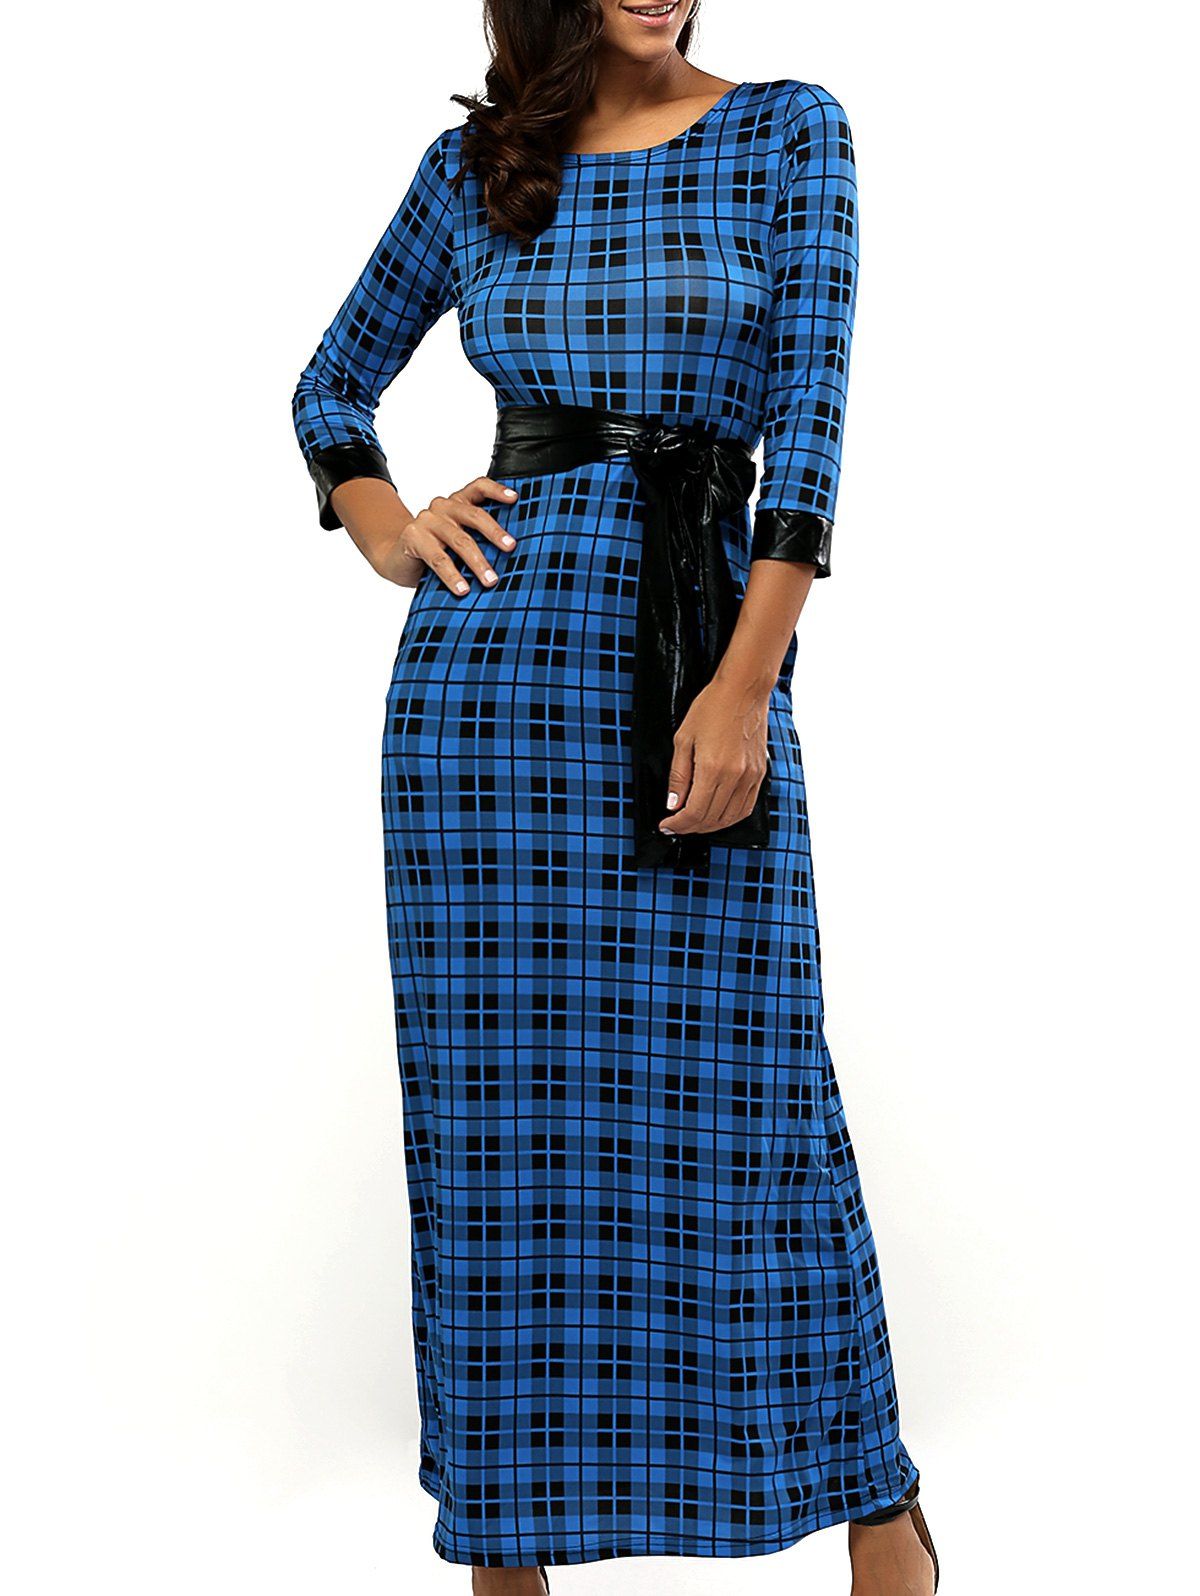 [41% OFF] 2021 Retro Women's Plaid Belted Maxi Dress In DEEP BLUE